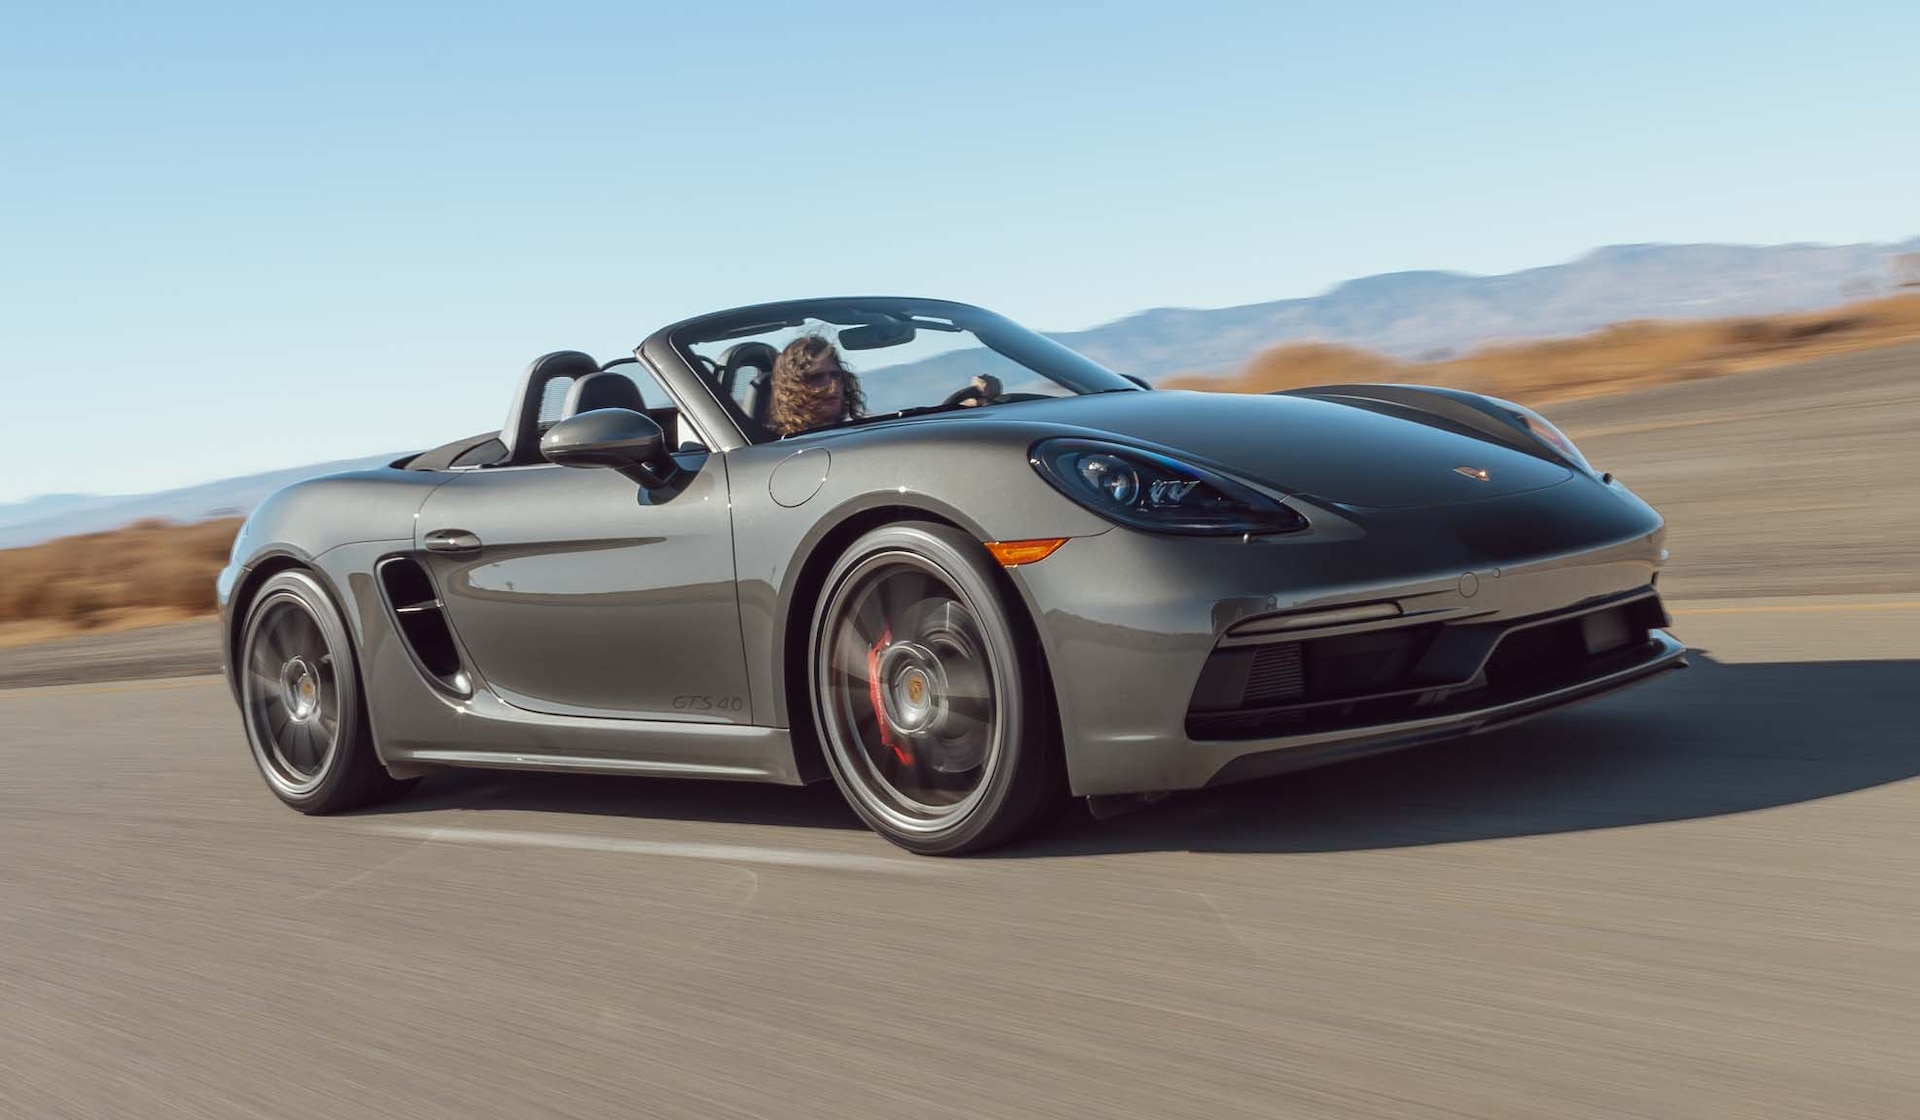 2021 Porsche 718 Boxster GTS 4.0 PVOTY Review: Good, Not (Yet) Great